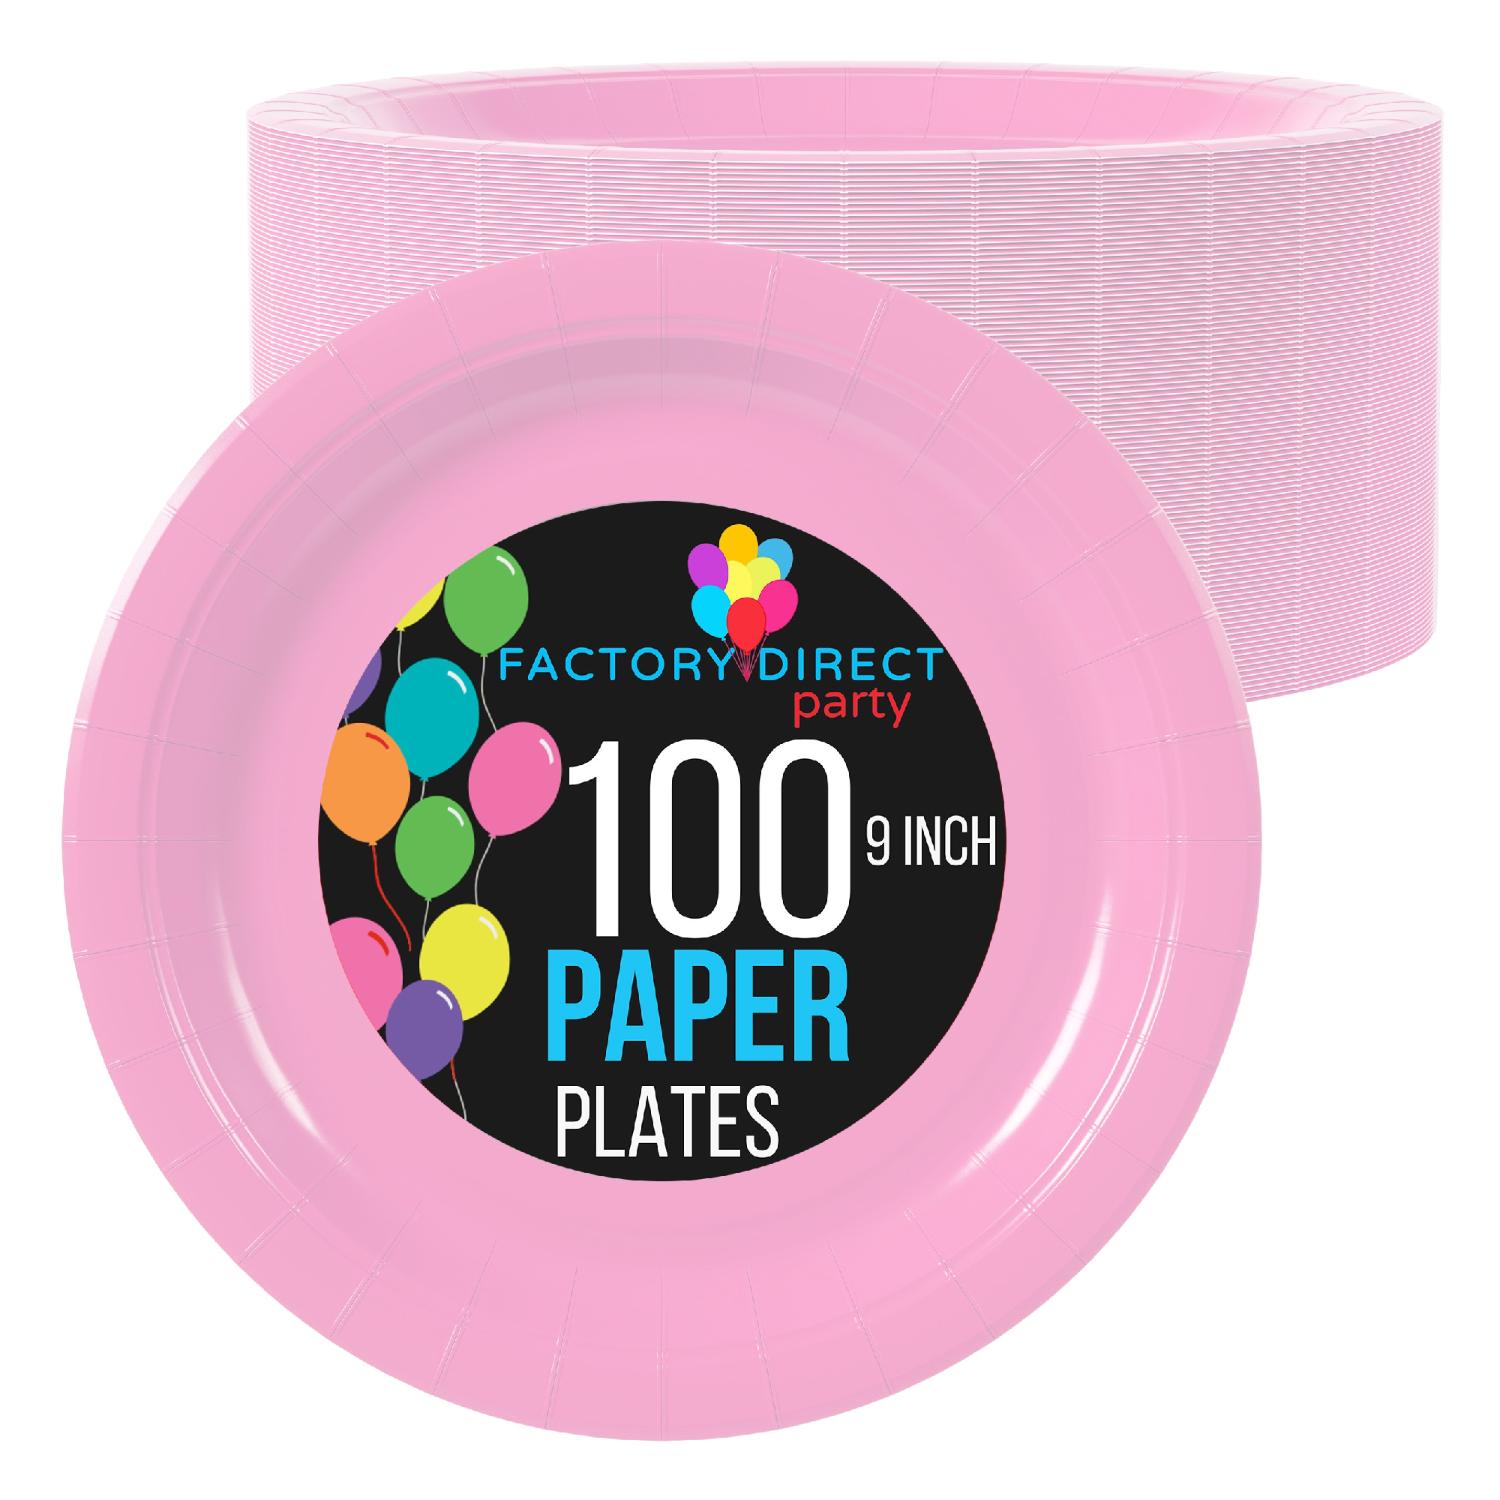 9 In. Pink Paper Plates - 100 Ct.